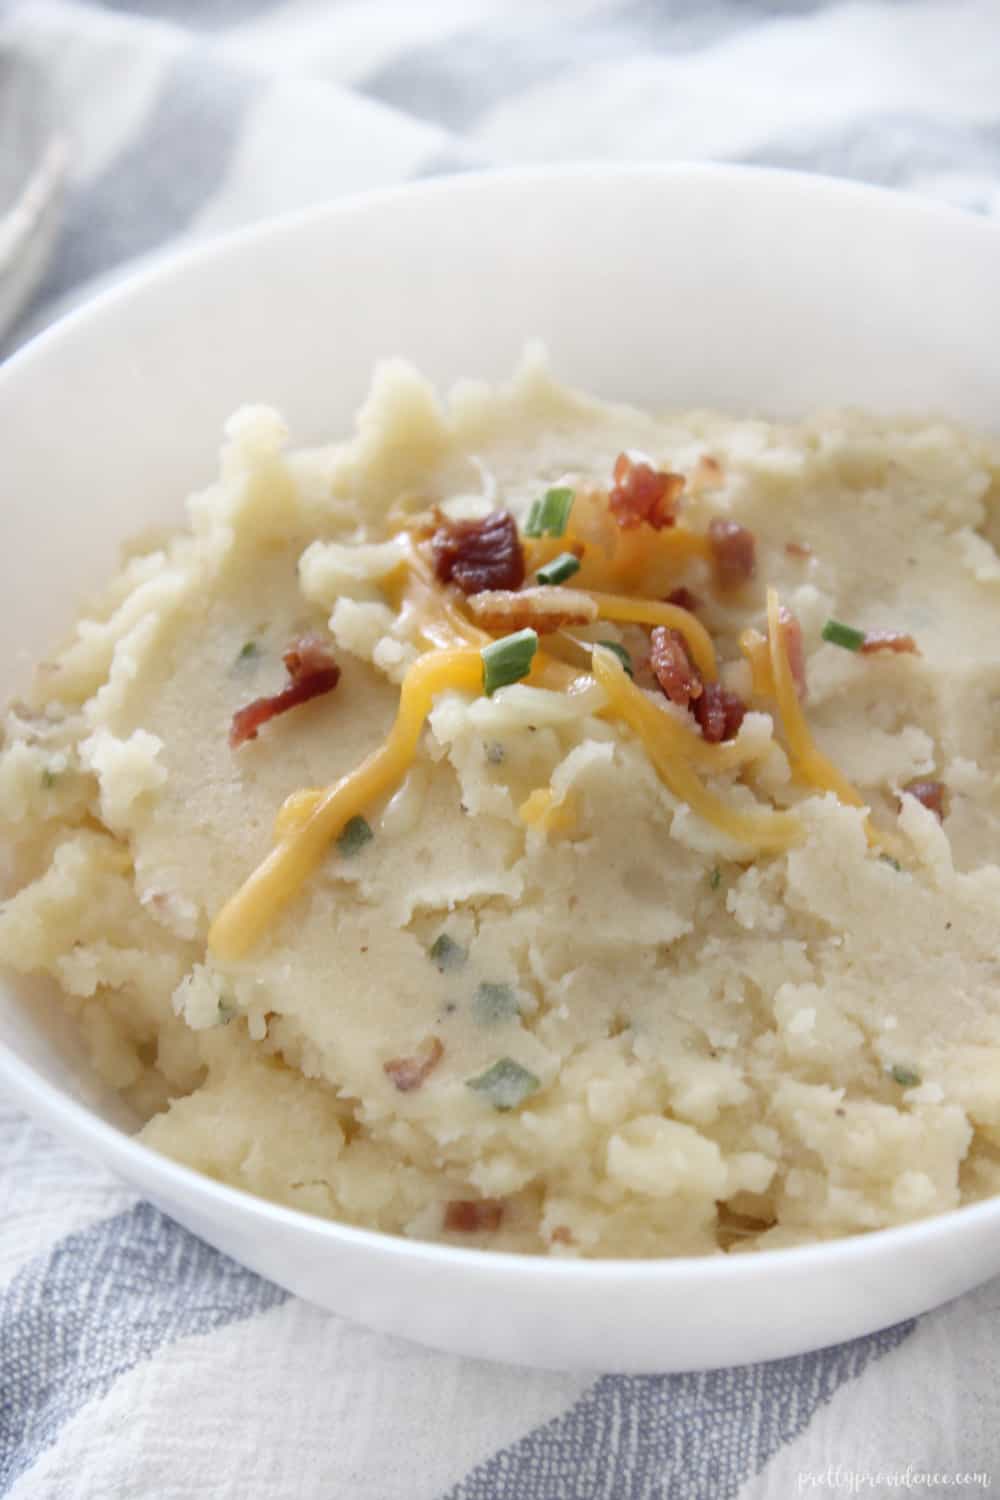 Slow cooker loaded mashed potatoes are the PERFECT side to bring to any pot luck gathering! So easy and so GOOD!